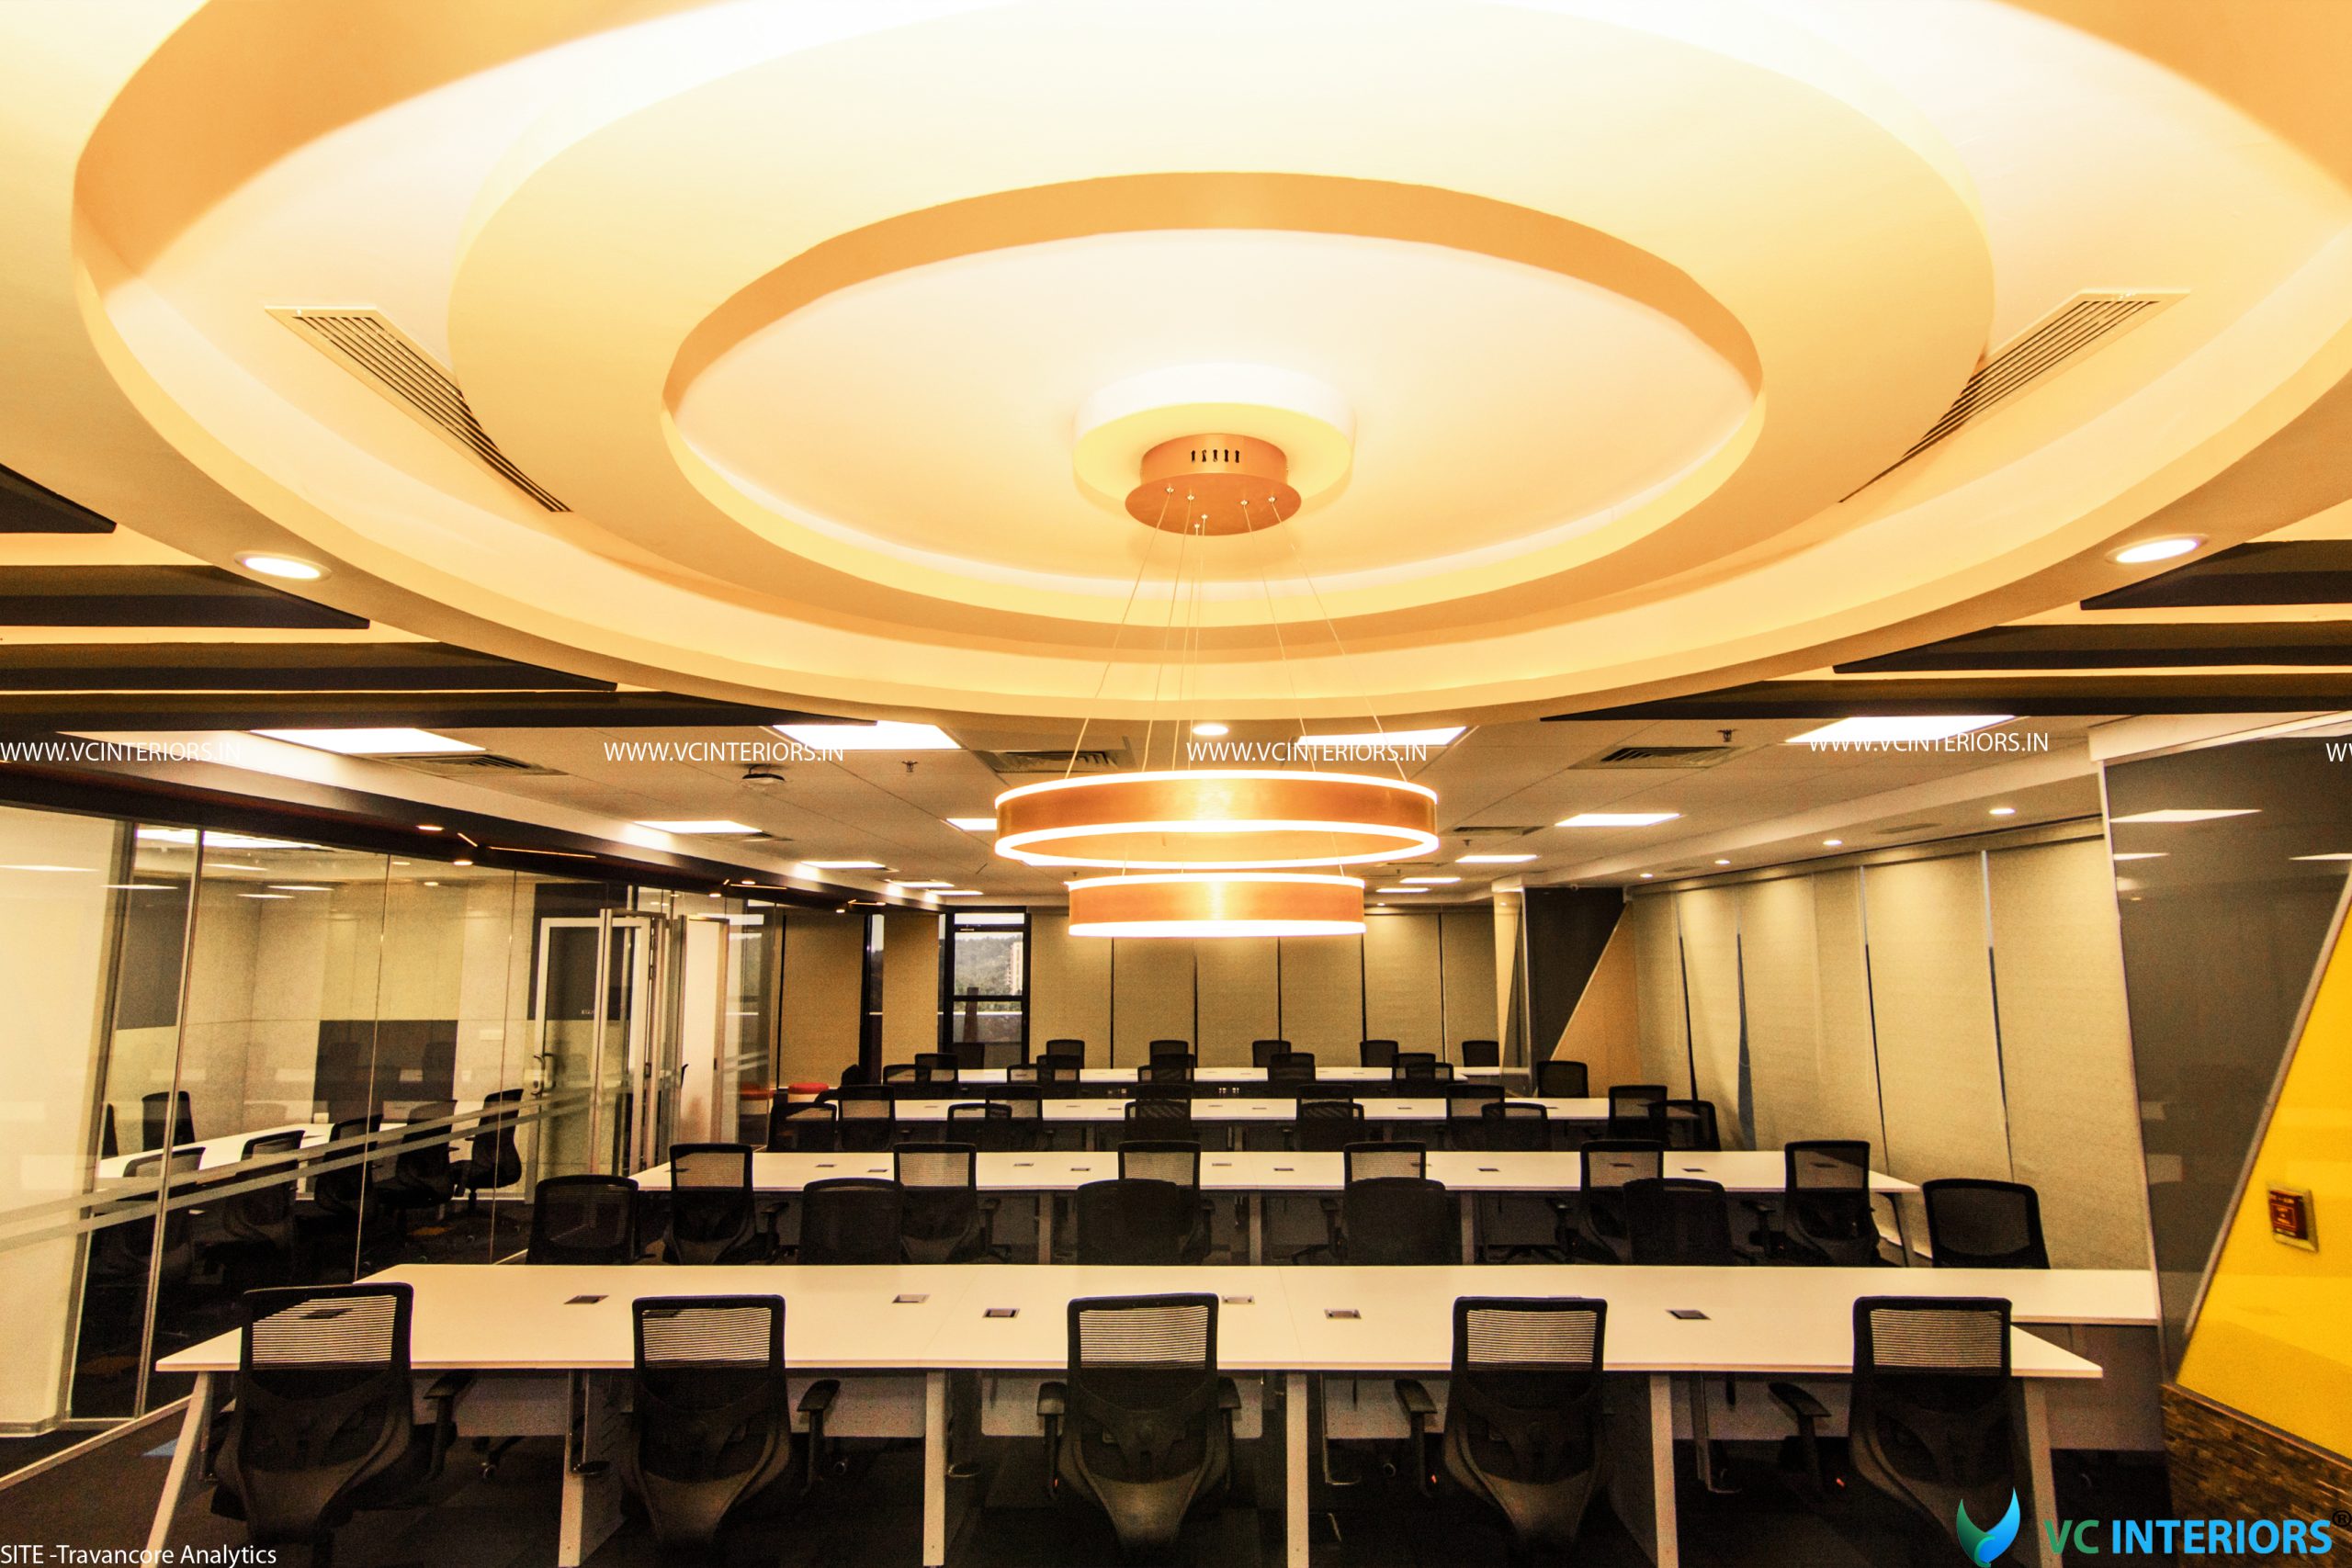 Commercial Office Interiors - VC Interiors